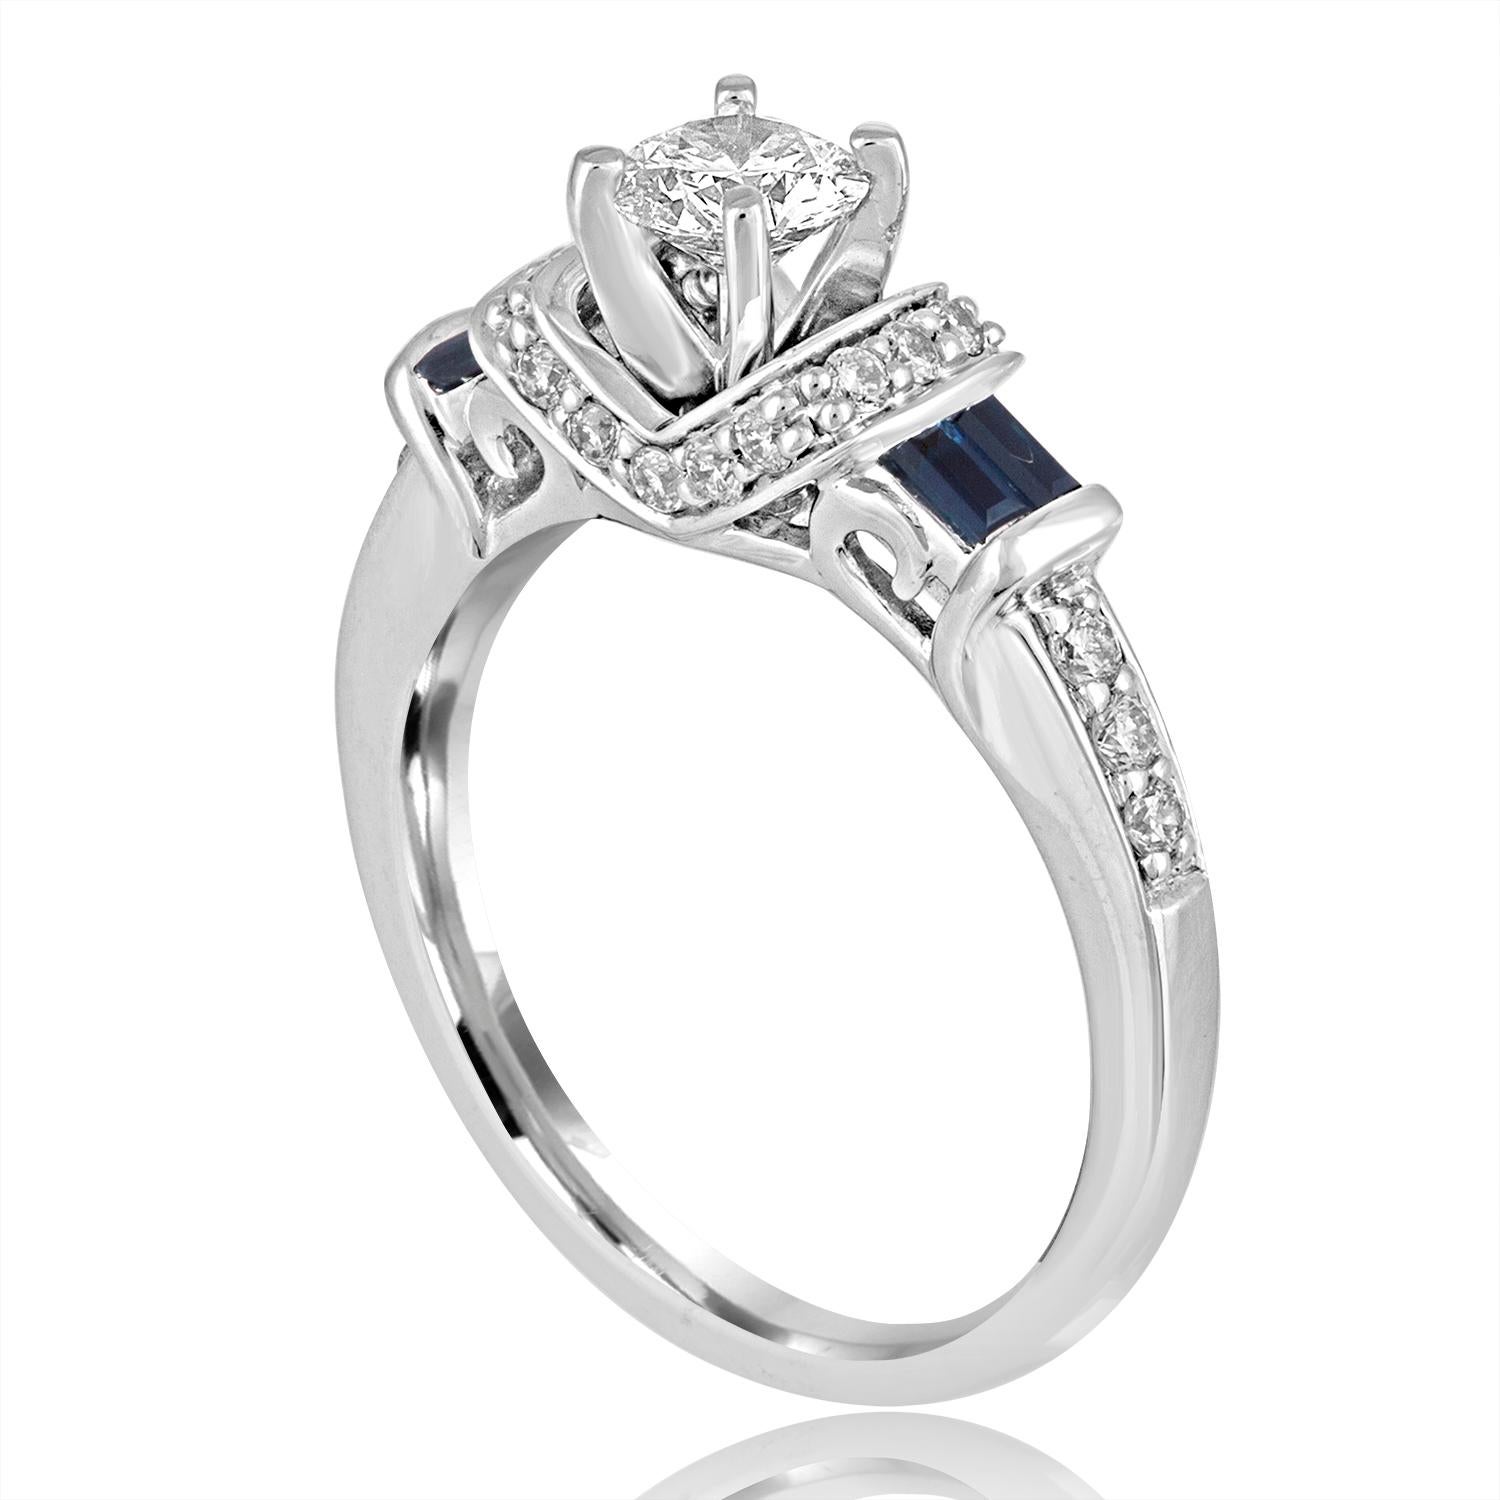 The ring is 14K White Gold
The center stone is 0.46 Carats G SI2
There are 4 step cut baguettes blue sapphires 0.40 Carats
There are 0.25 Carats in Small Round diamonds H SI
The ring is a size 6.75, sizable.
The ring weighs 4.1 grams.